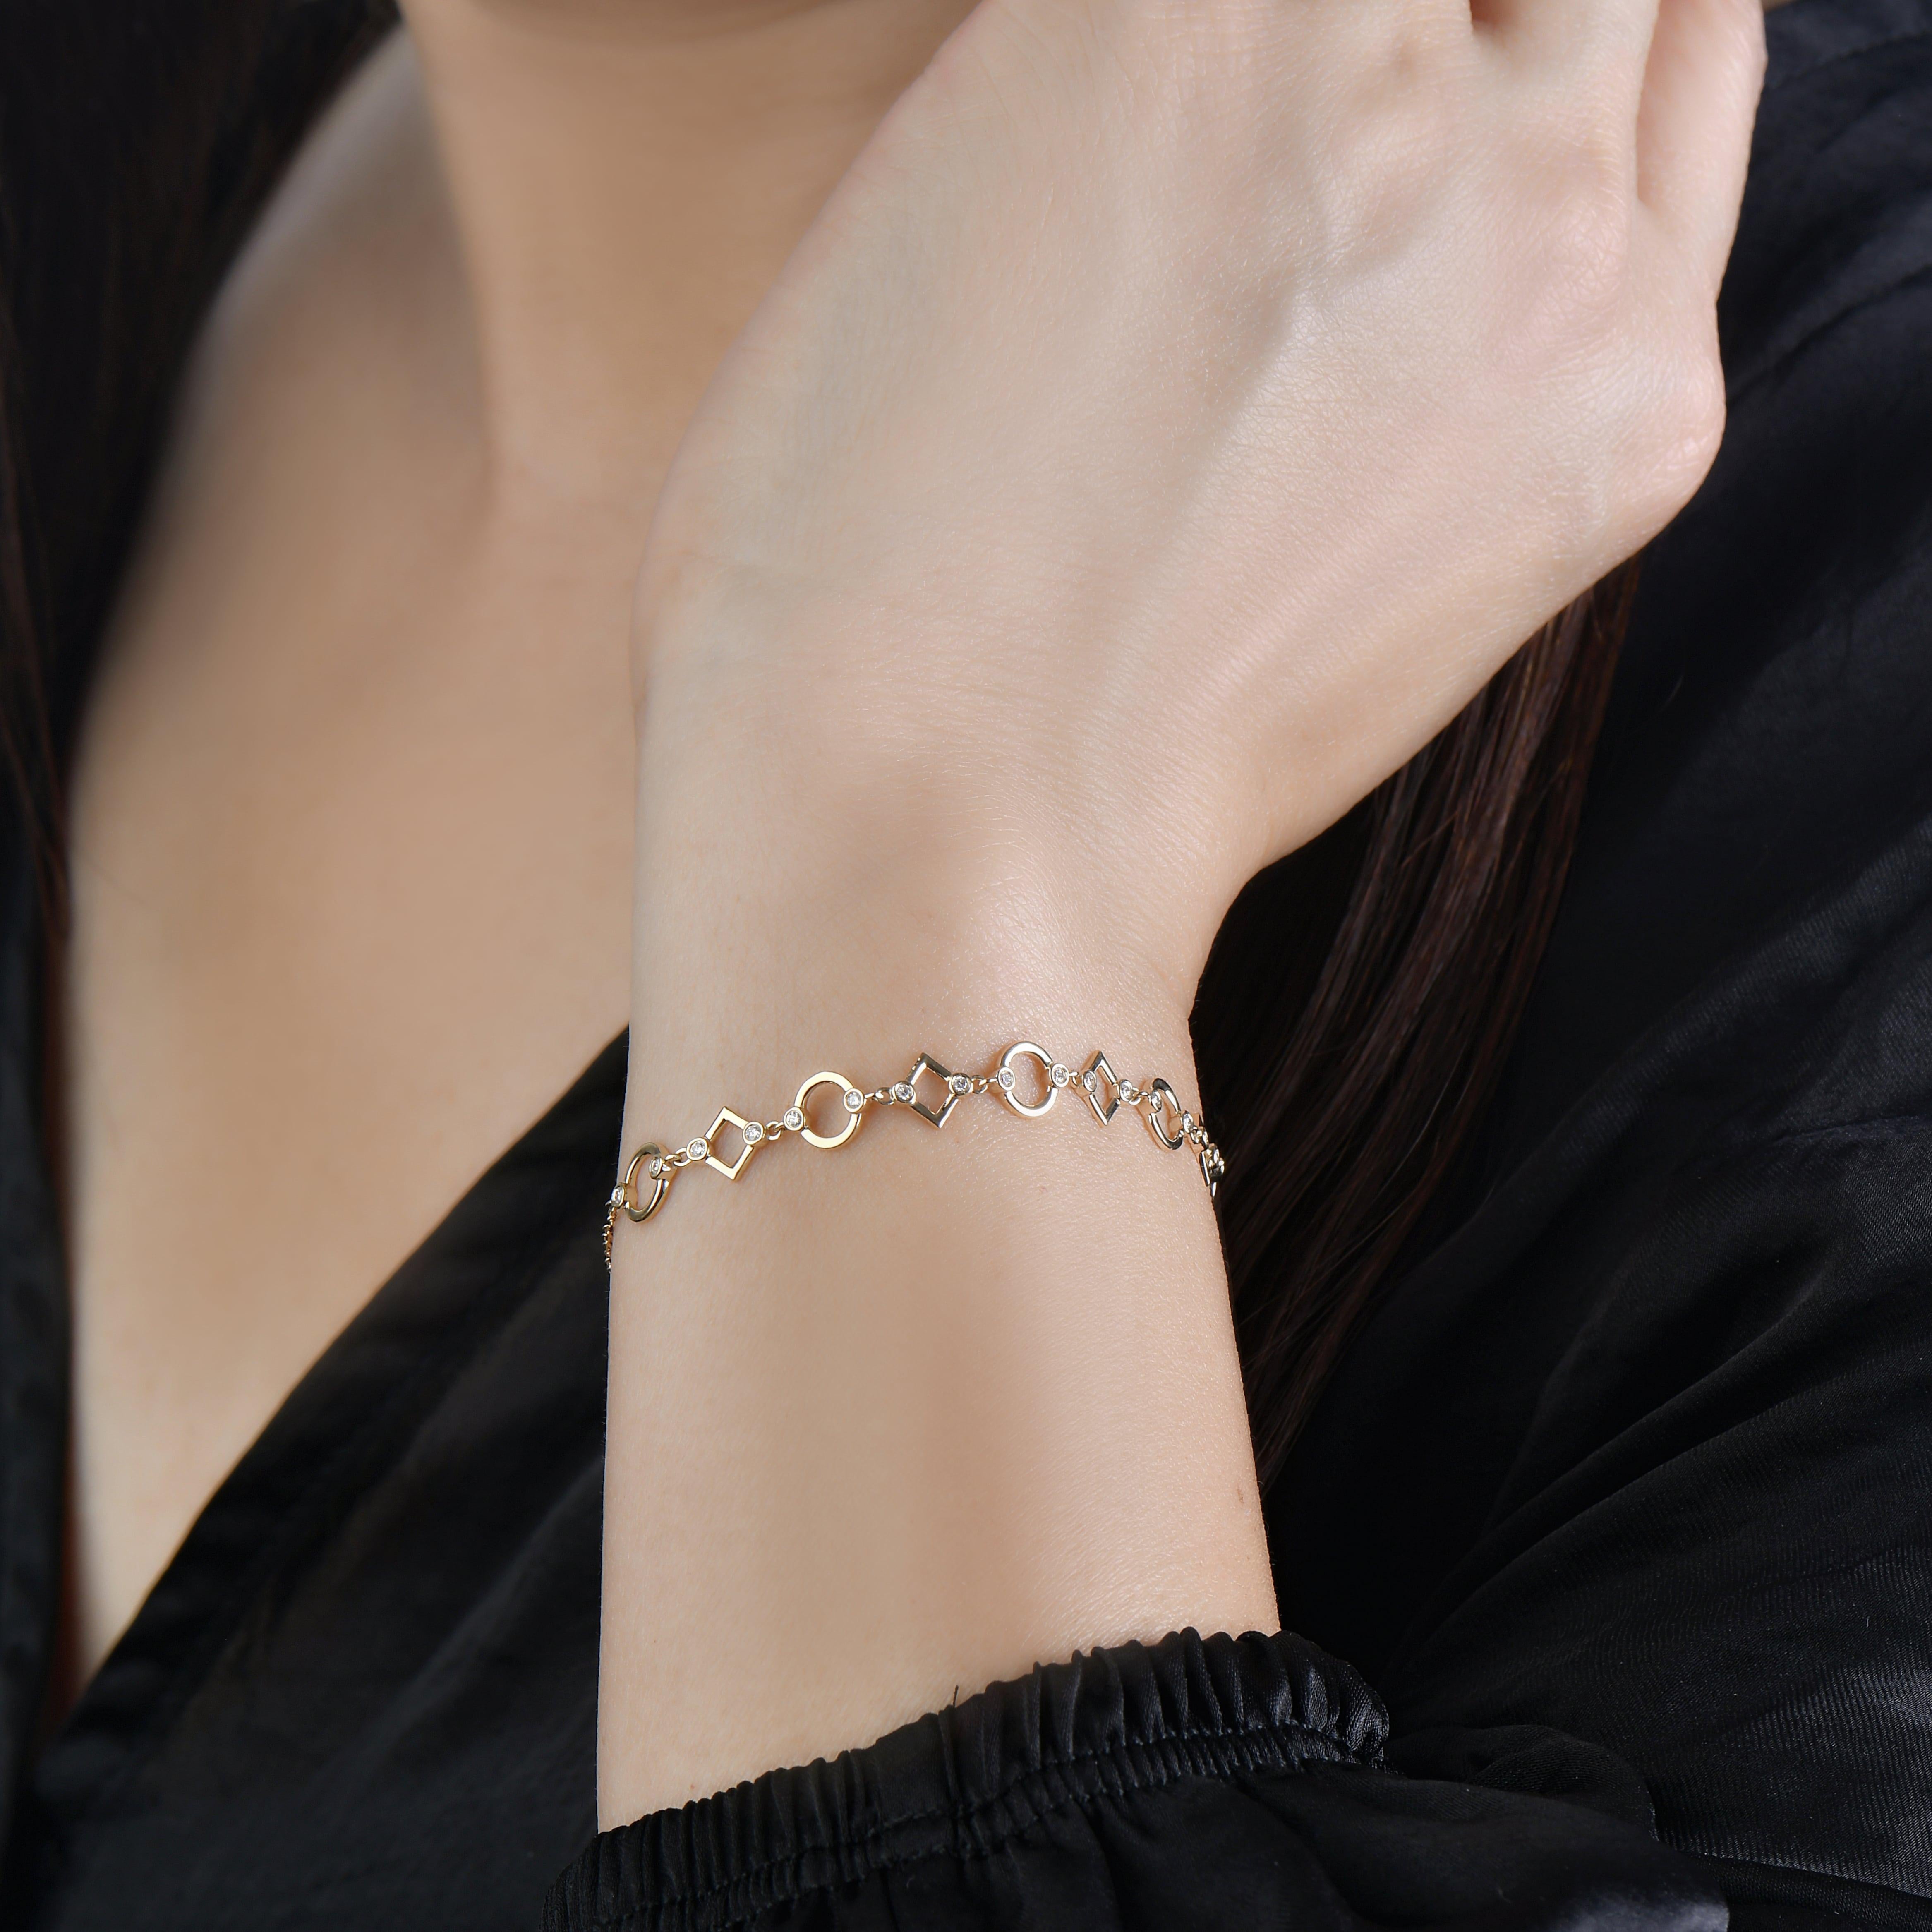 This geometric diamond bracelet embodies femininity. A classy and chic design, the bracelet embodies the connection between two people. This romantic piece is the perfect stackable bracelet yet it's chic enough to wear as a standout. 

14K Gold